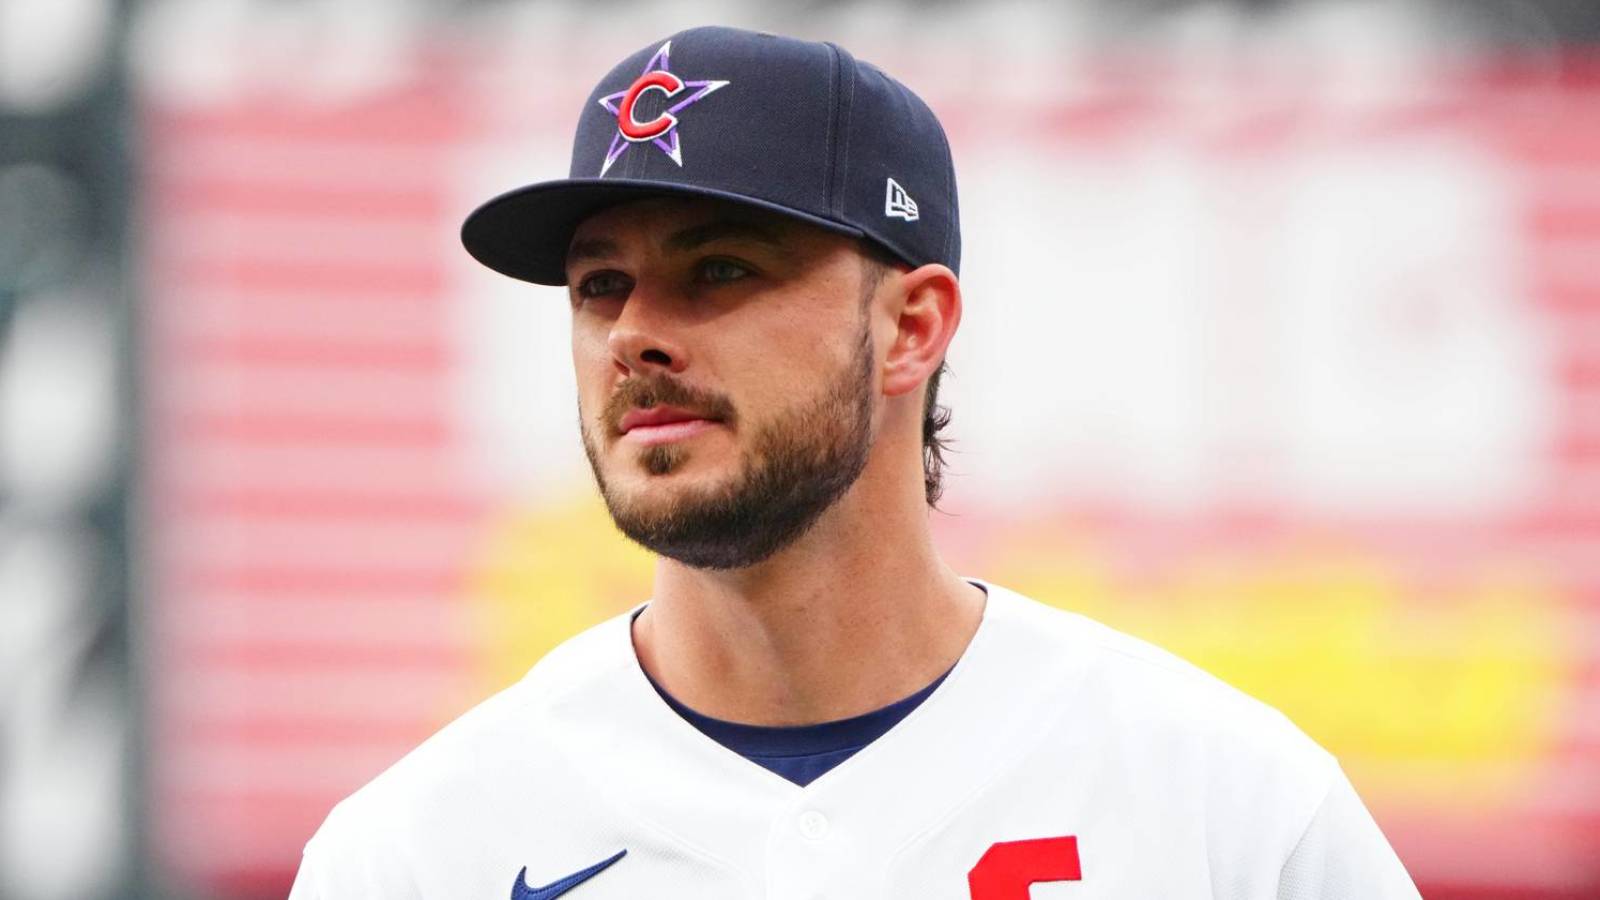 Report: Former Cubs All-Star Kris Bryant signs with the Rockies